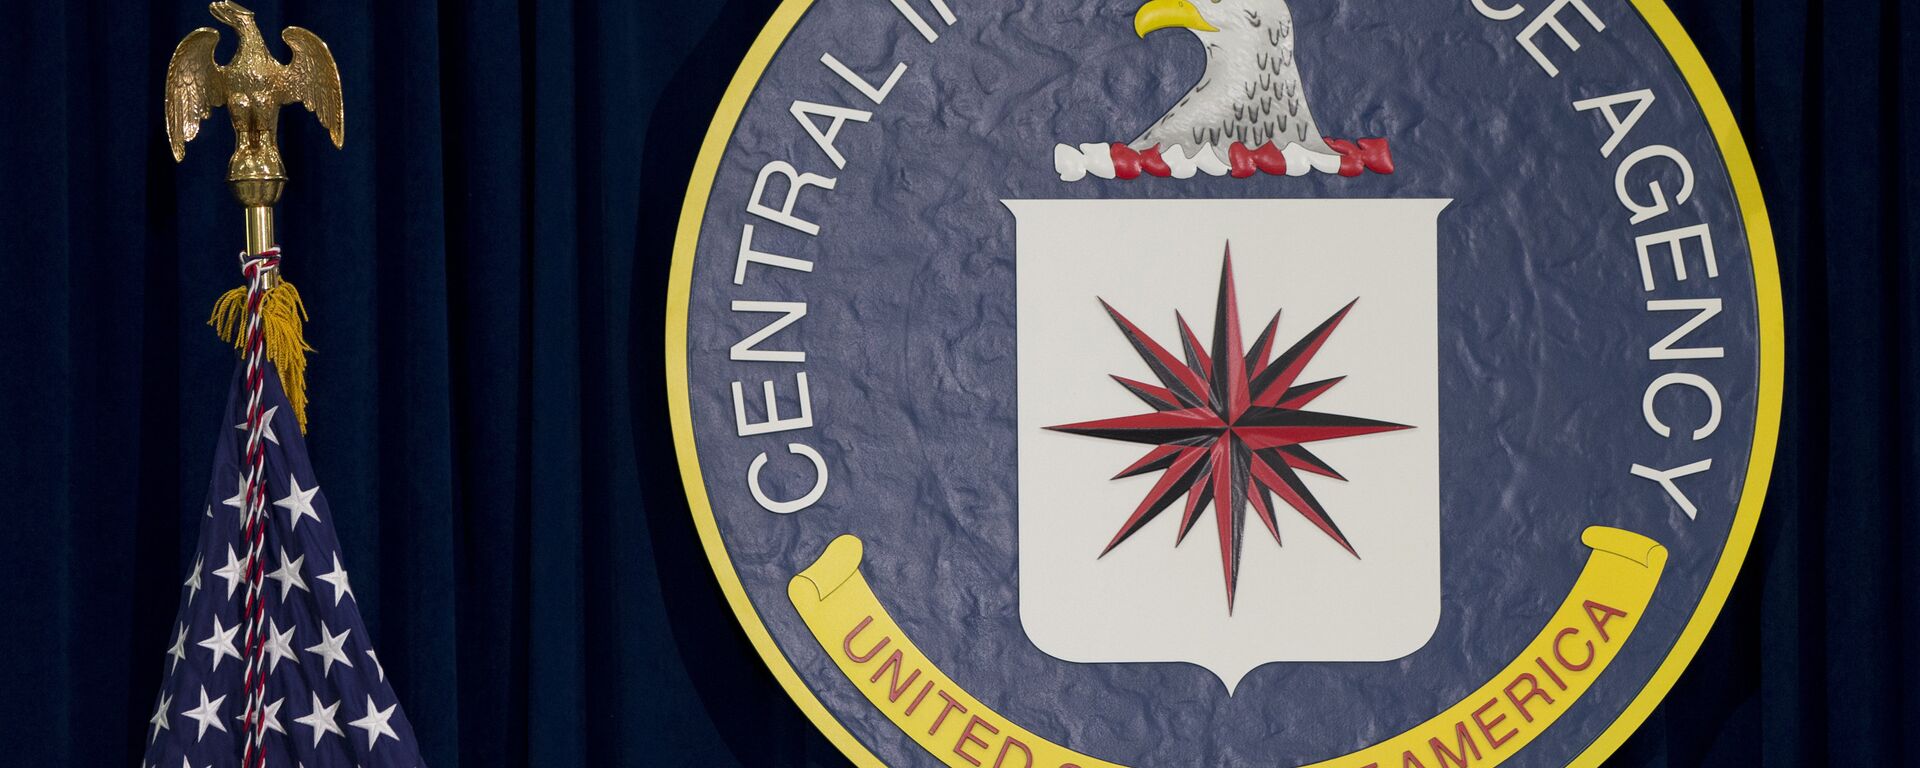 This April 13, 2016 file photo shows the seal of the Central Intelligence Agency at CIA headquarters in Langley, Virginia.  - Sputnik International, 1920, 04.02.2020